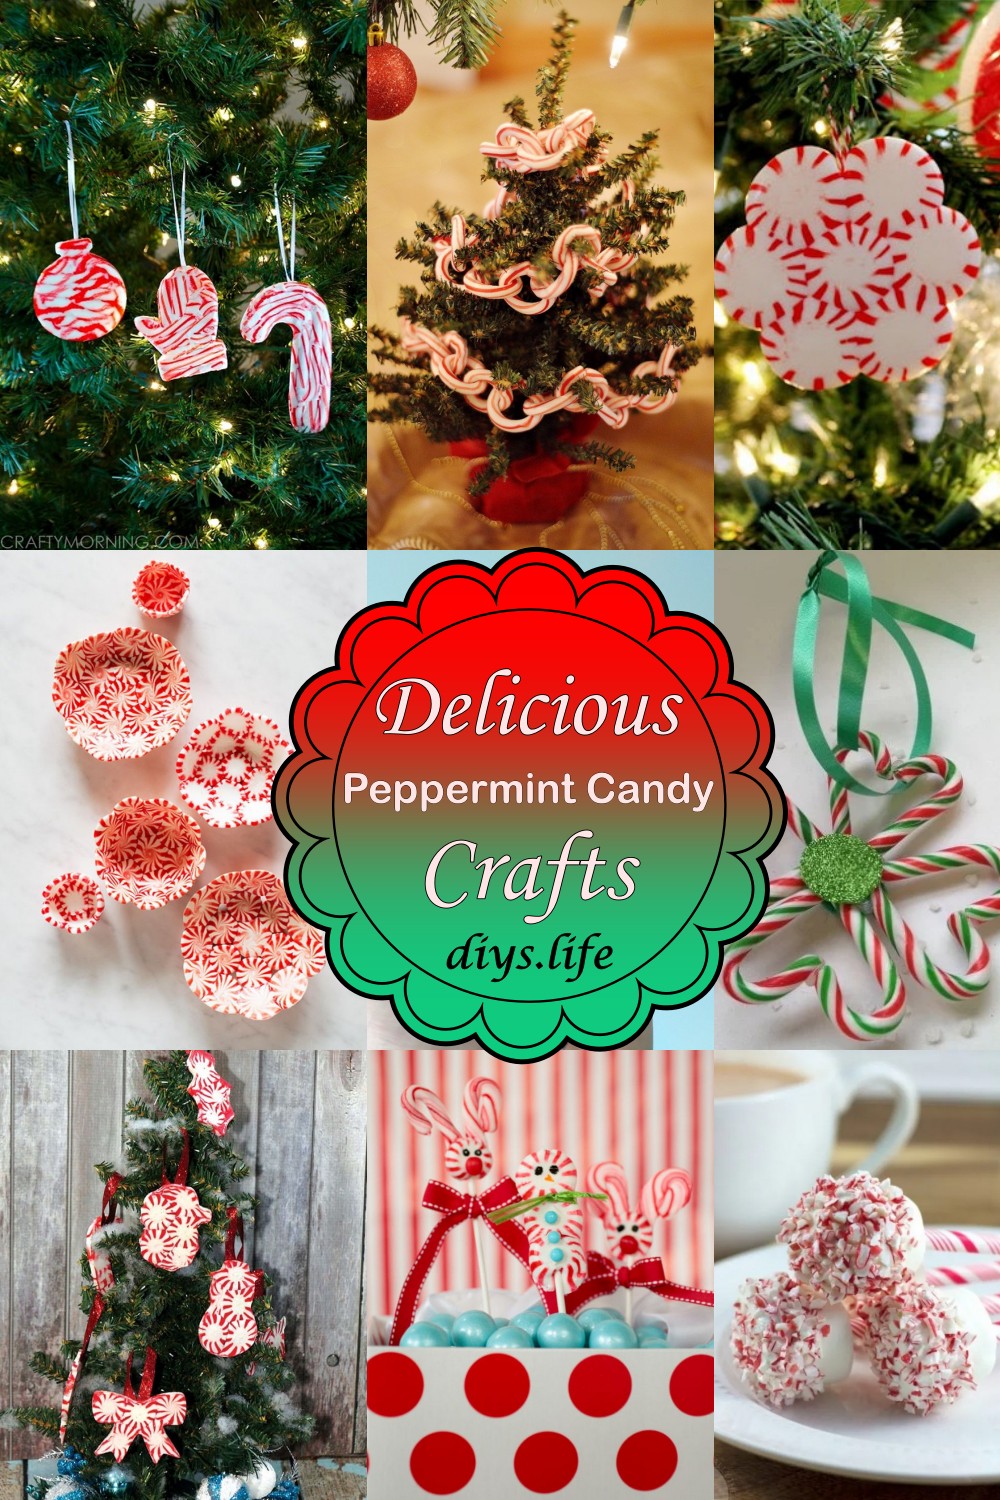 Delicious Peppermint Candy Crafts